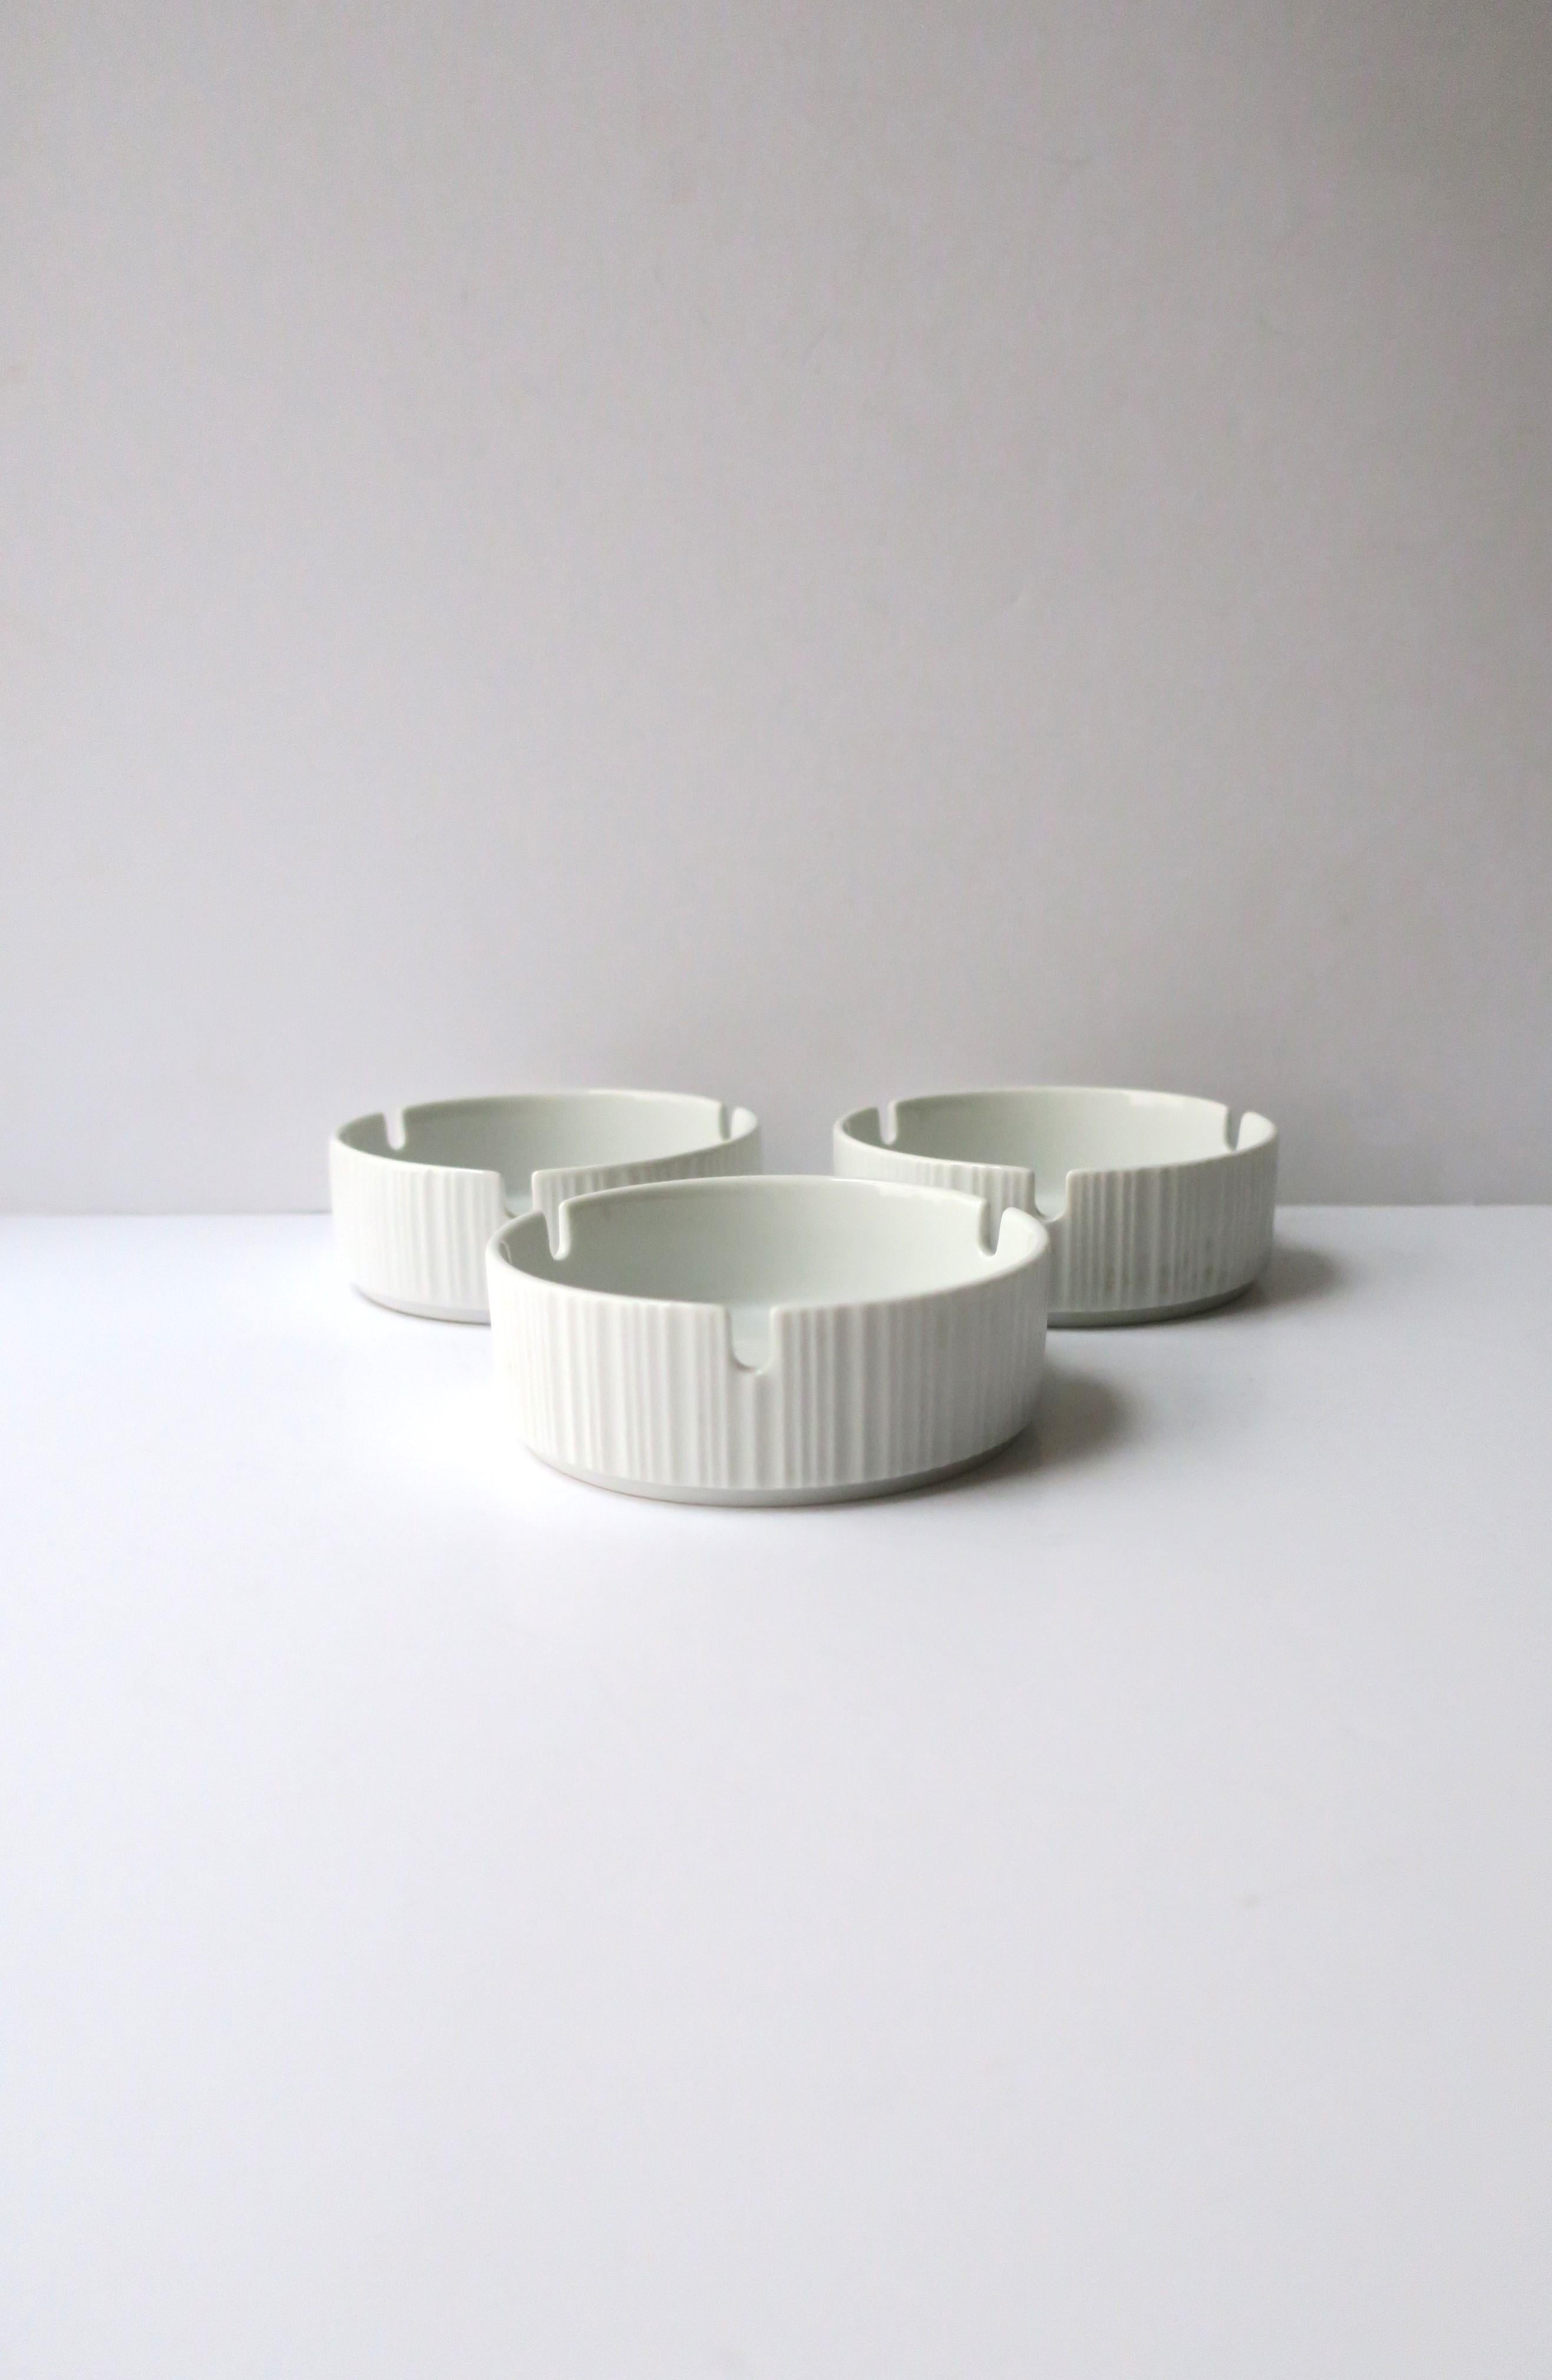 *Three (3) available, each sold separately, as per listing. 

German white porcelain ashtray (or catchall) in the 'variation' pattern, Midcentury Modern period, attributed to Finnish designer and sculptor, Tapio Wirkkala, for Rosenthal Studio-Line,